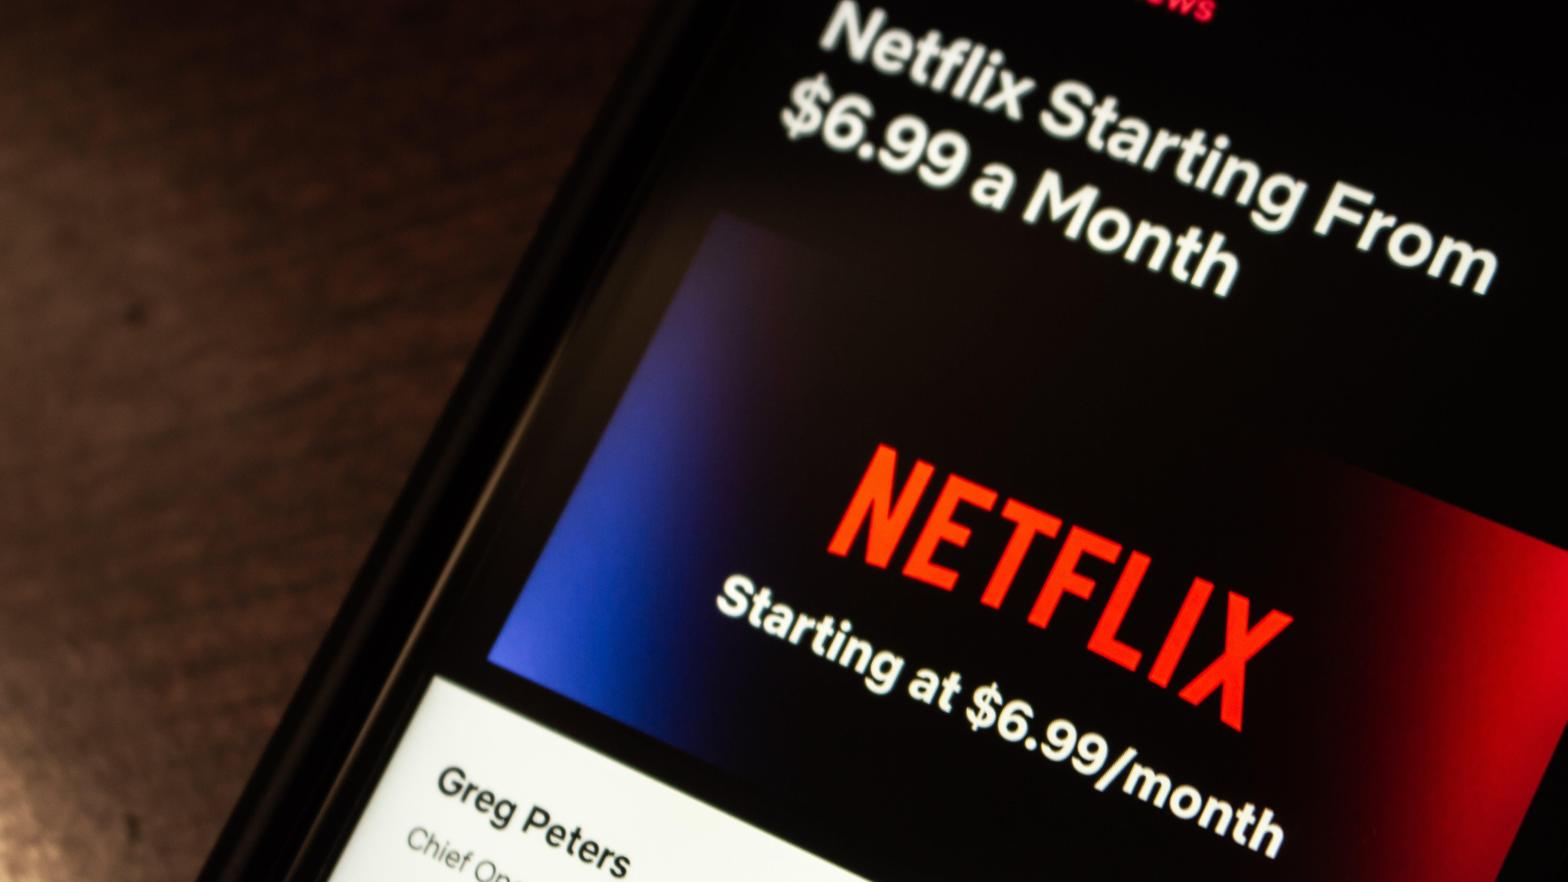 Netflix's Basic With Ads tier reportedly has 1 million monthly active users, a pretty big jump from where it was after its initial rollout. (Photo: Koshiro K, Shutterstock)